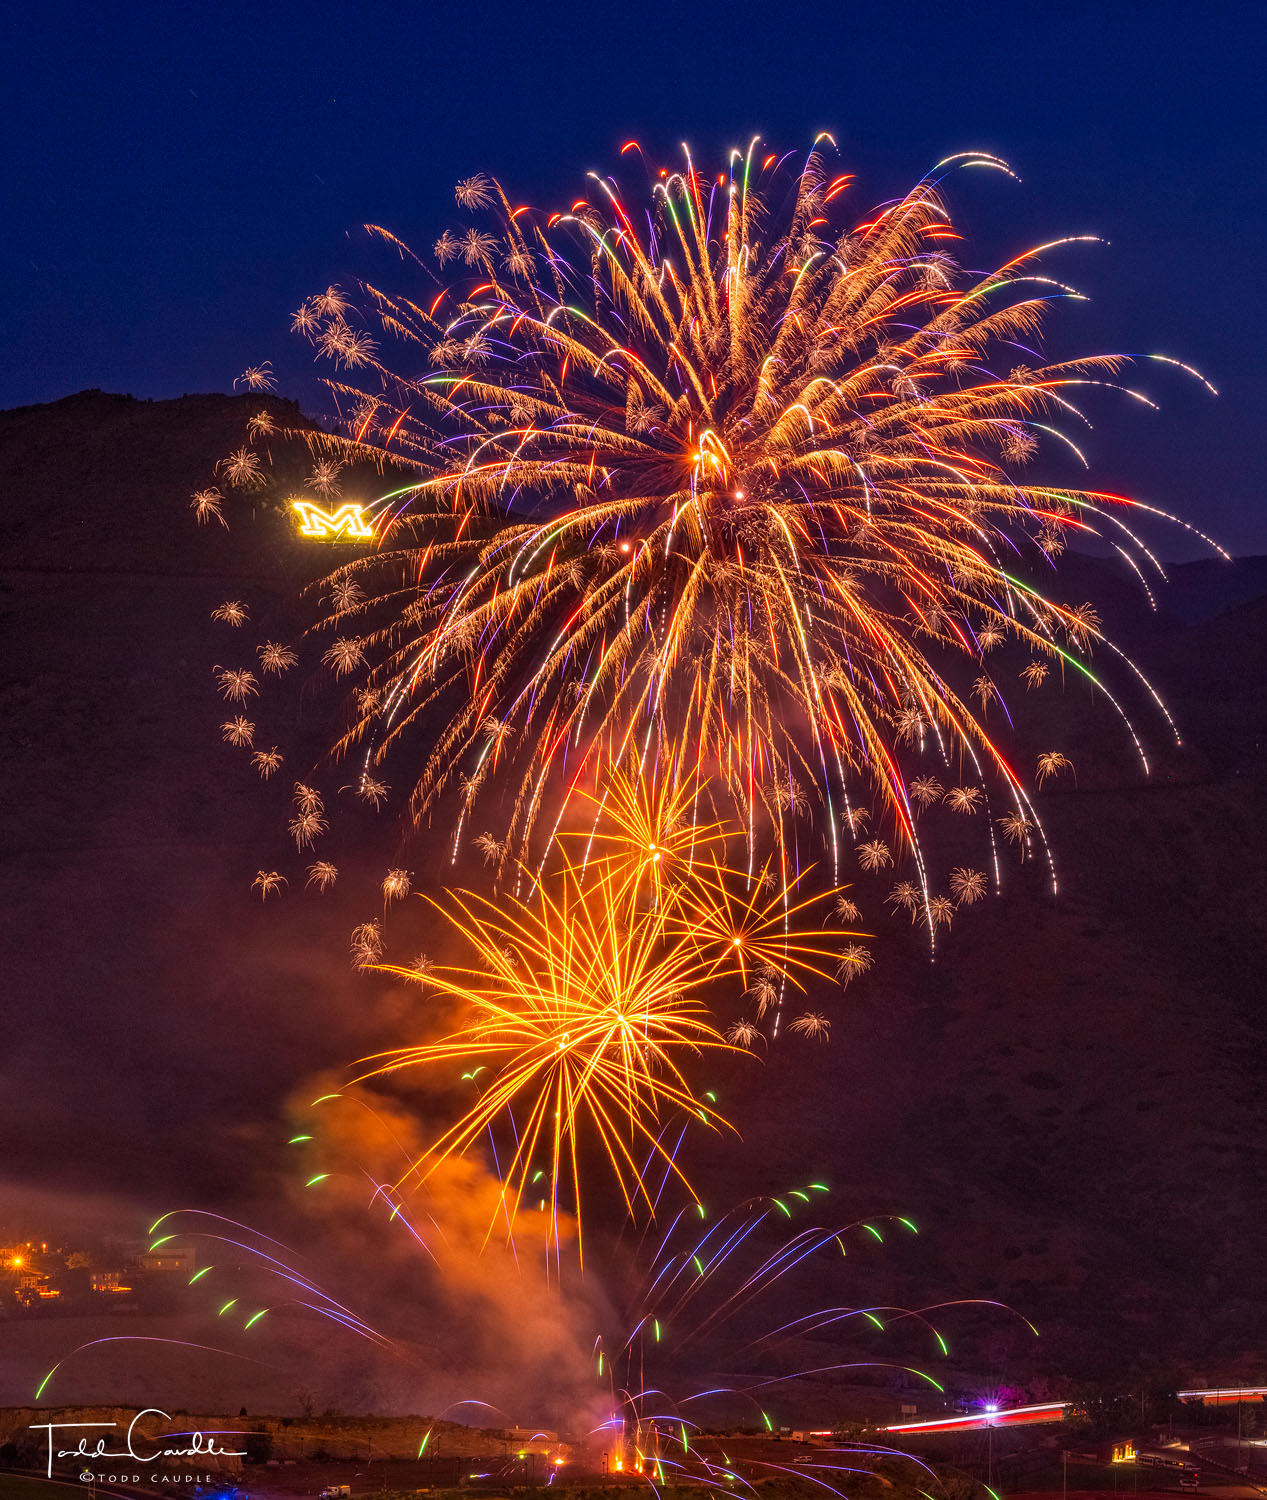 Fireworks burst in the air in front of Mount Zion and the Colorado School of Mines "M" logo.